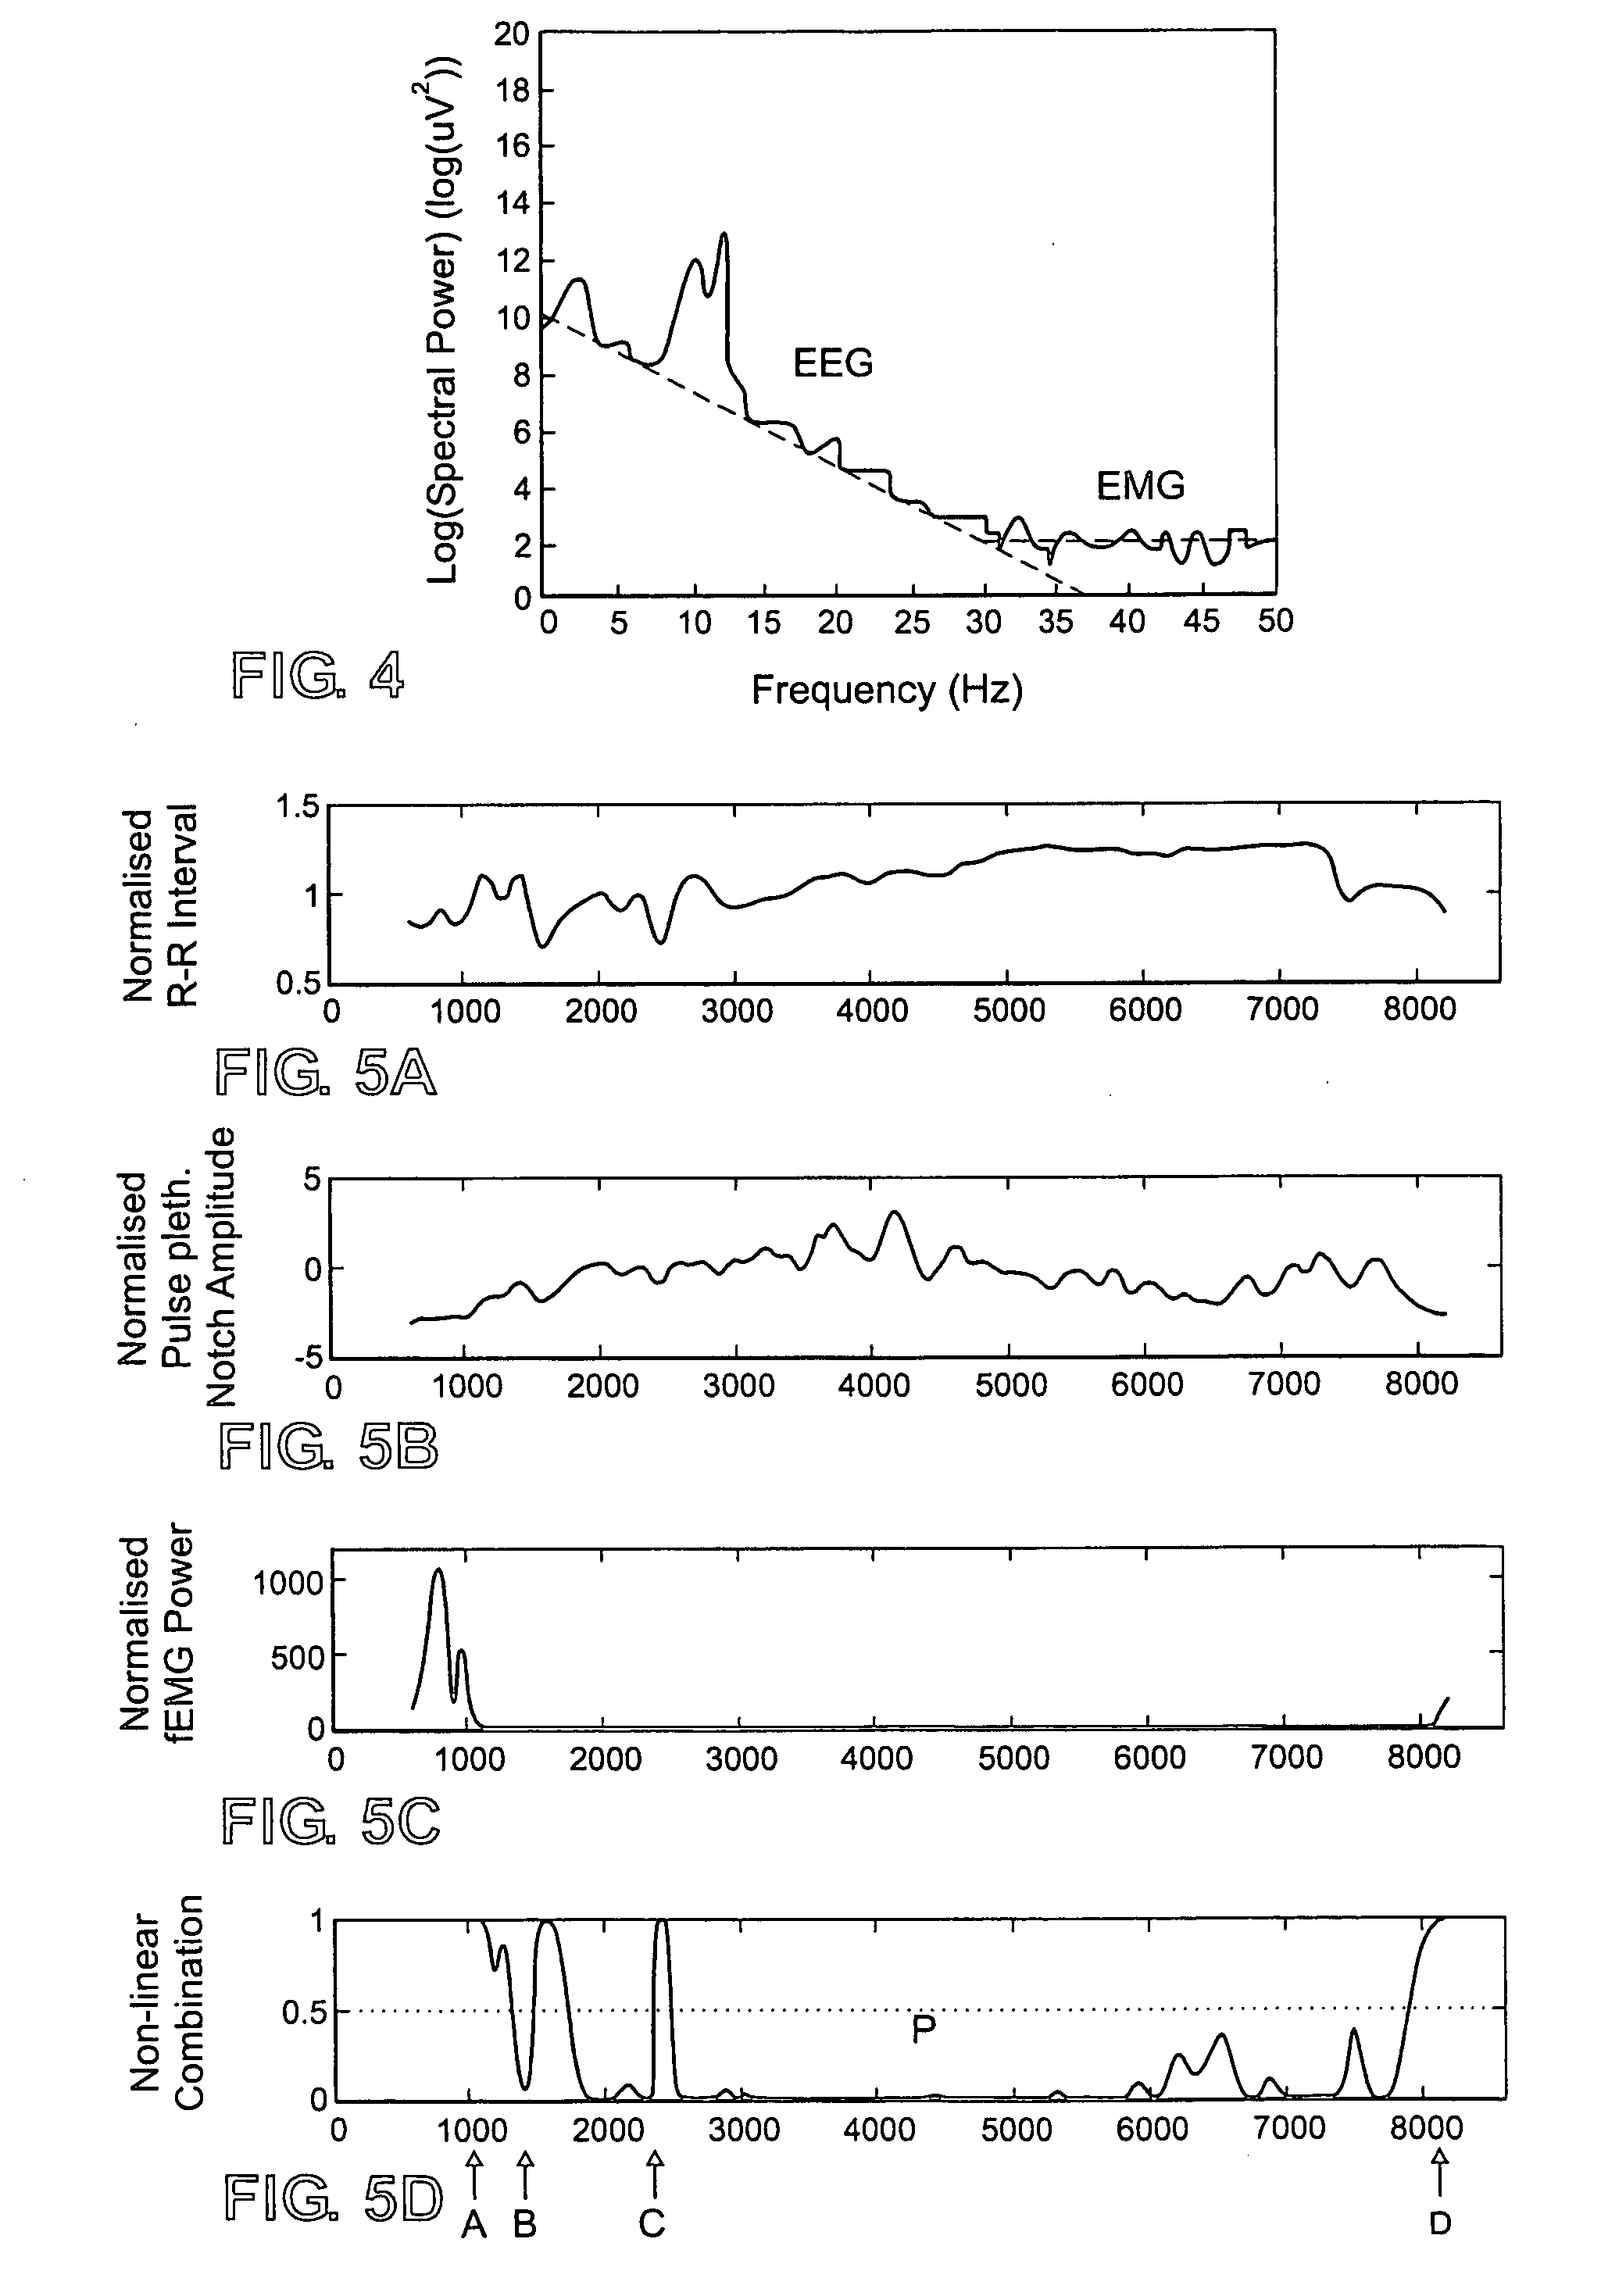 Method and apparatus based on combination of physiological parameters for assessment of analgesia during anesthesia or sedation